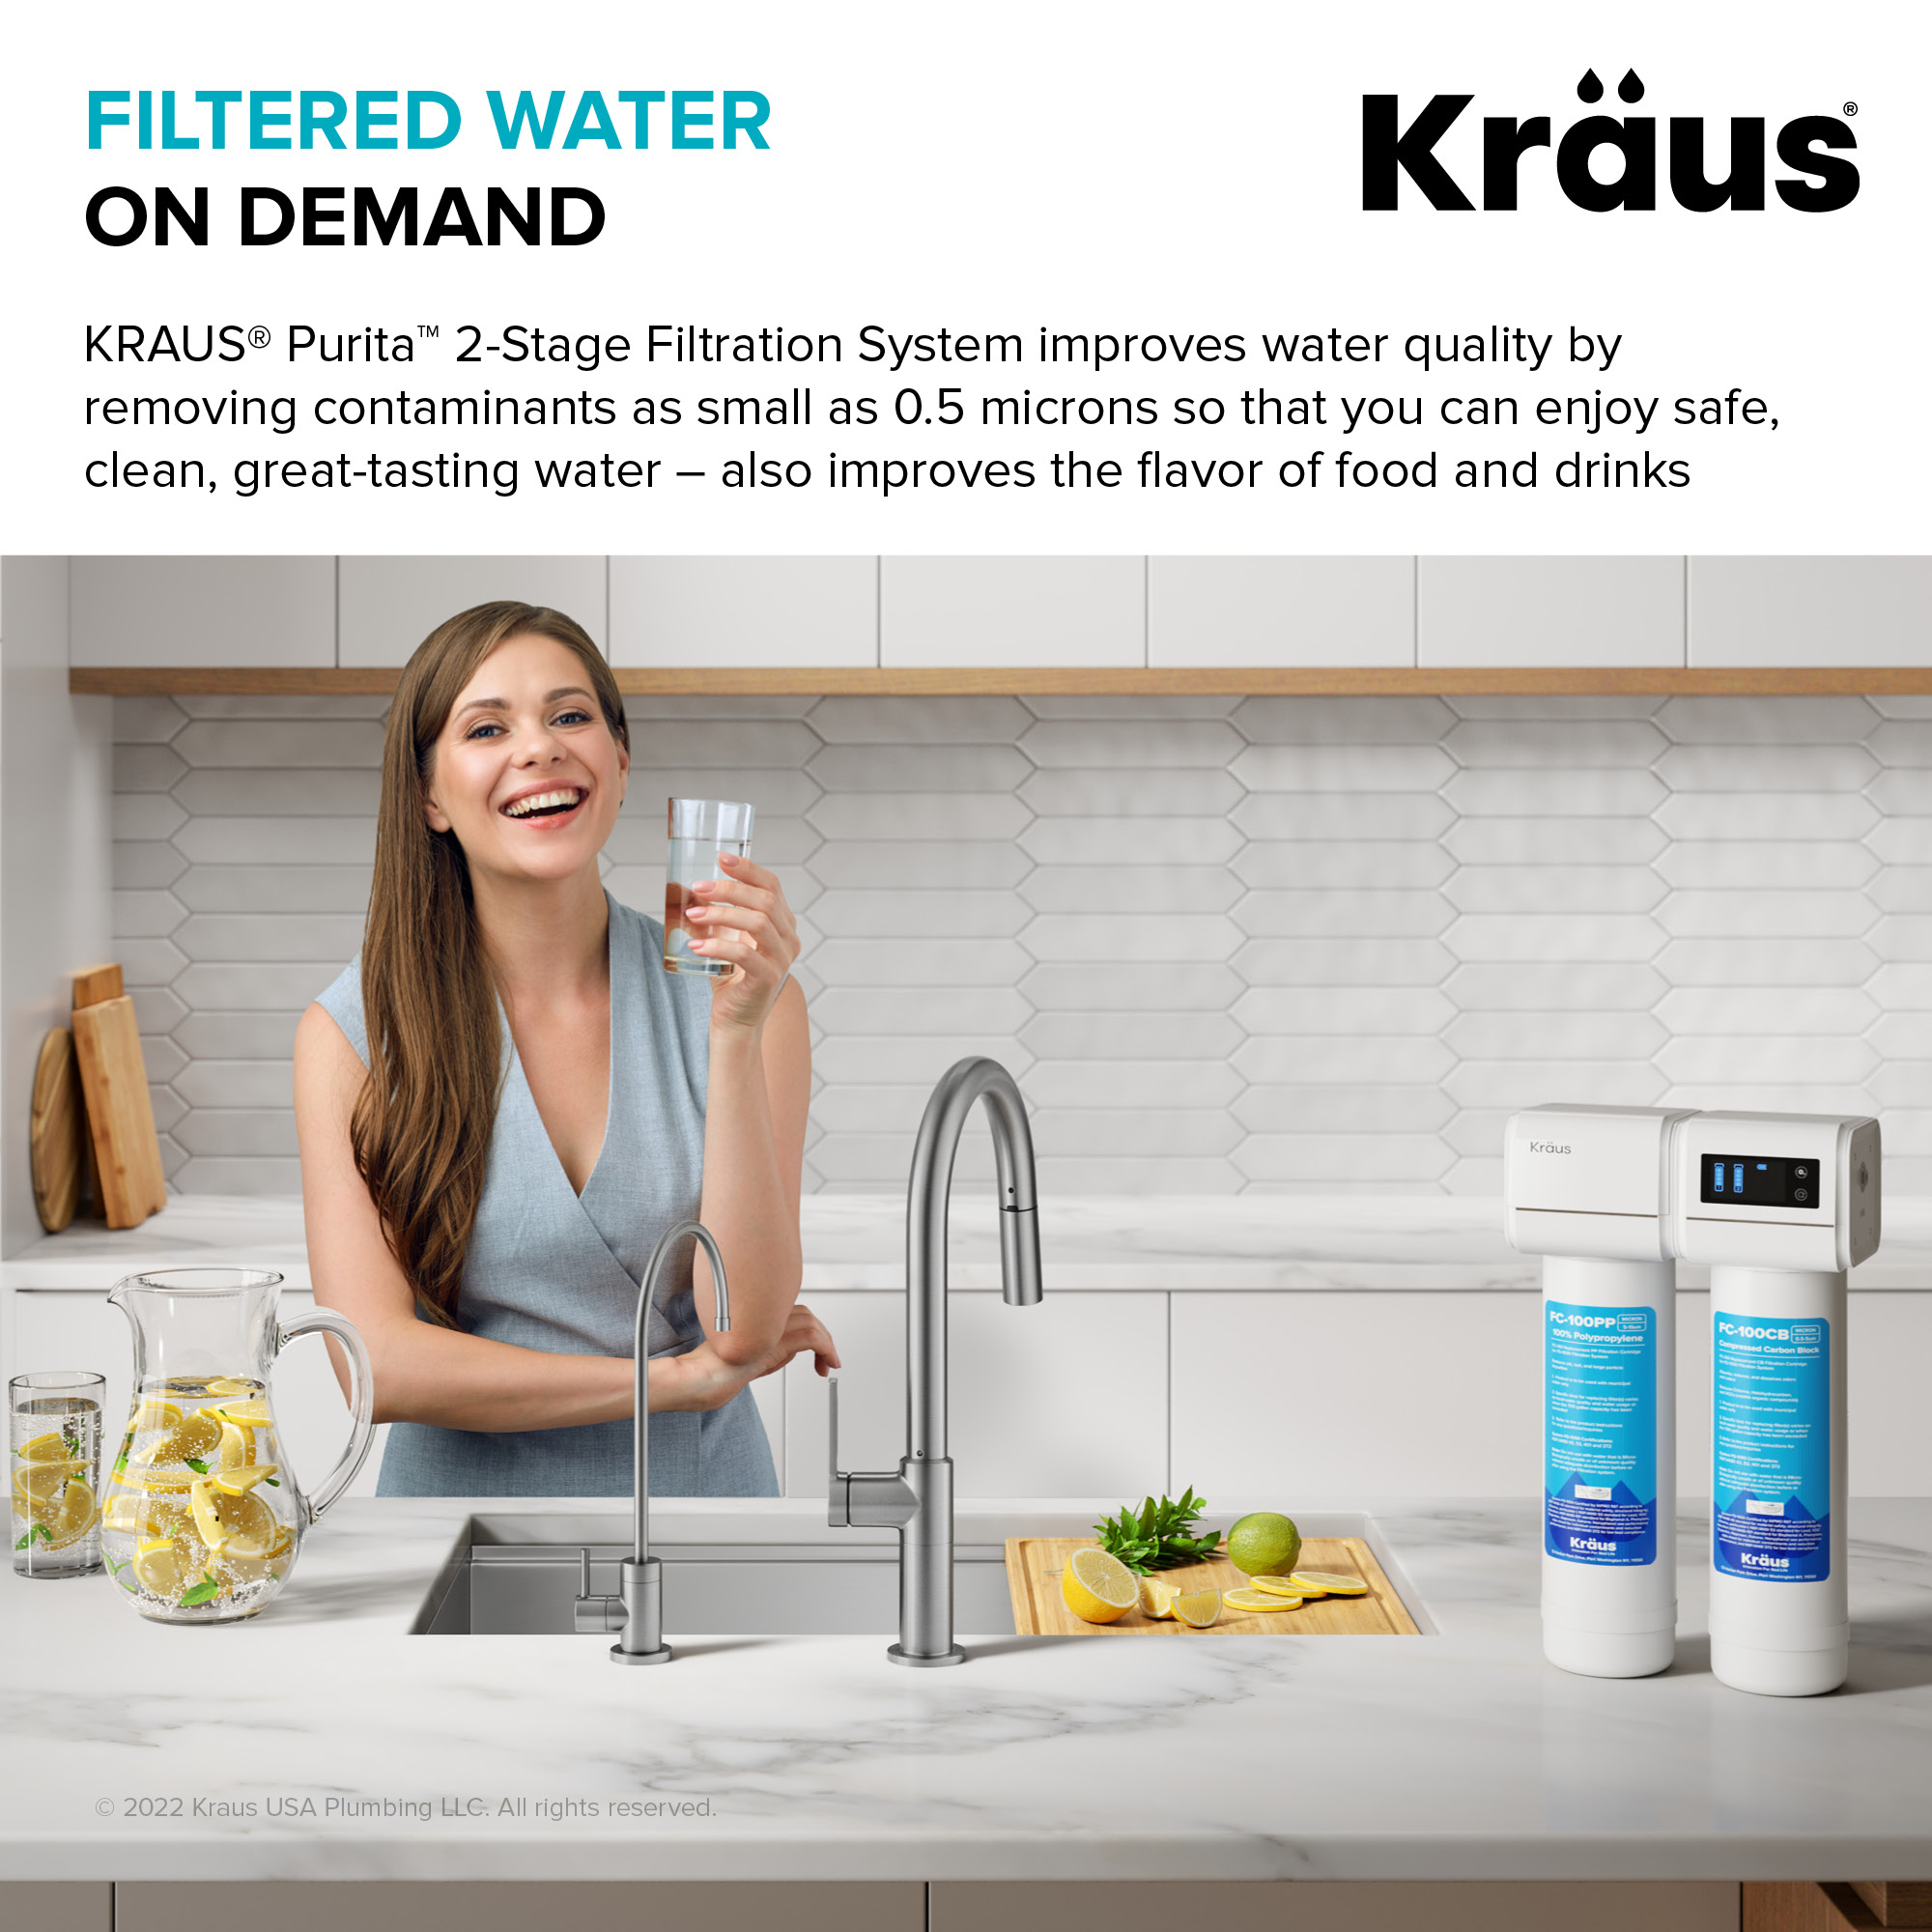 Brita P 3000 Faucet Water Filter Refill Replacement for Kitchen Tap Water  Station Cartridge : : Home & Kitchen